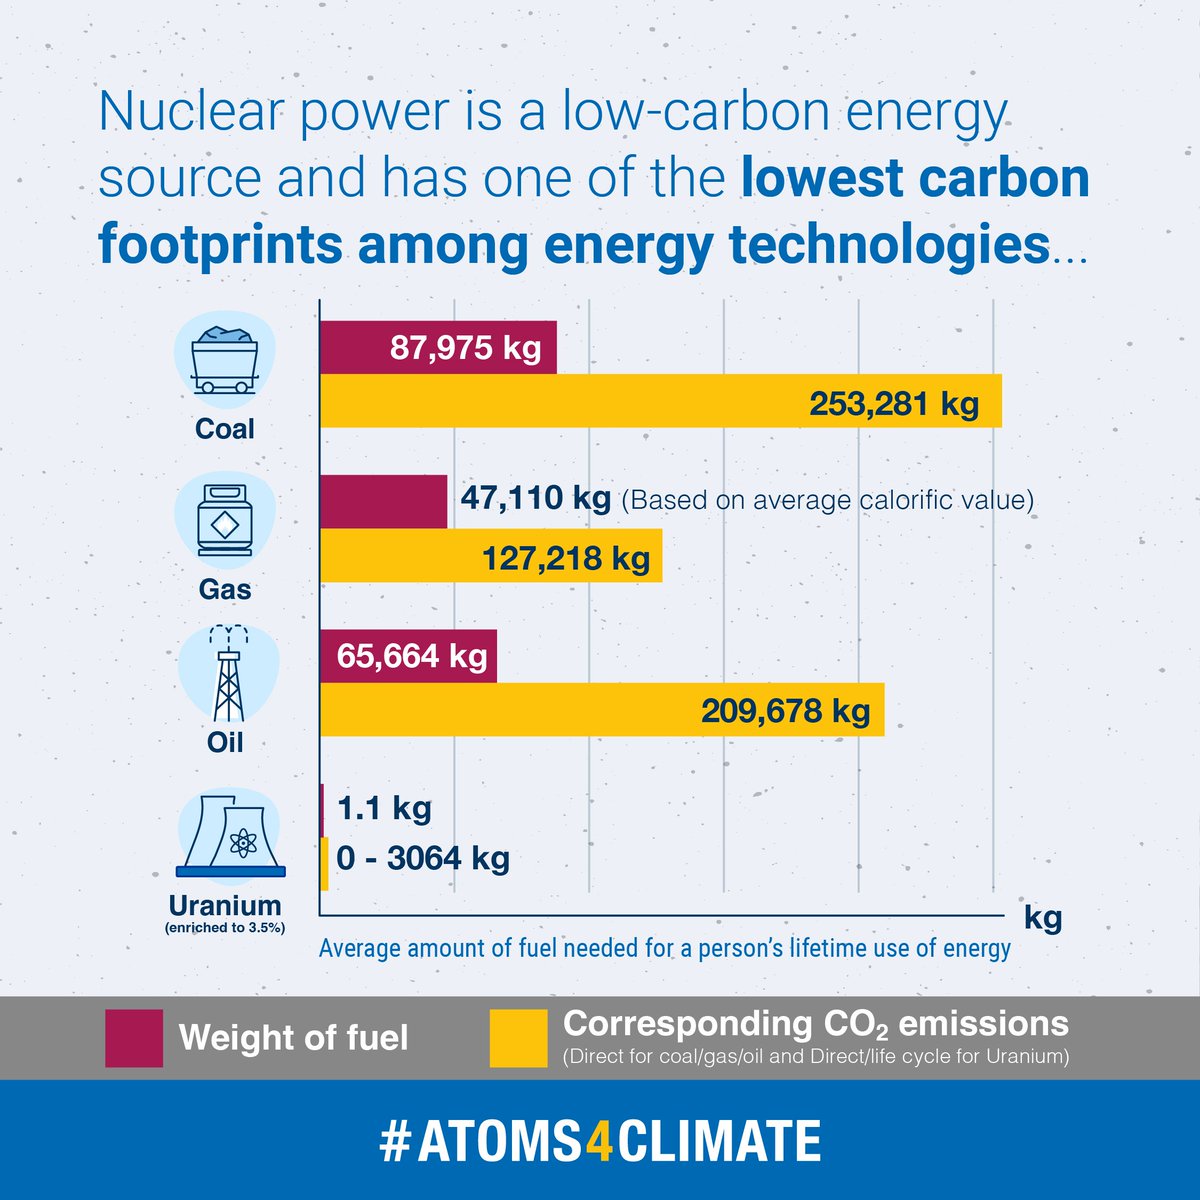 ⚡ Nuclear power is a low-carbon energy source and has one of the lowest carbon footprints among energy technologies, providing 10% of the world’s electricity 🌏 and more than a quarter of global low carbon electricity.

#Atoms4Climate #Atoms4NetZero #NuclearEnergy